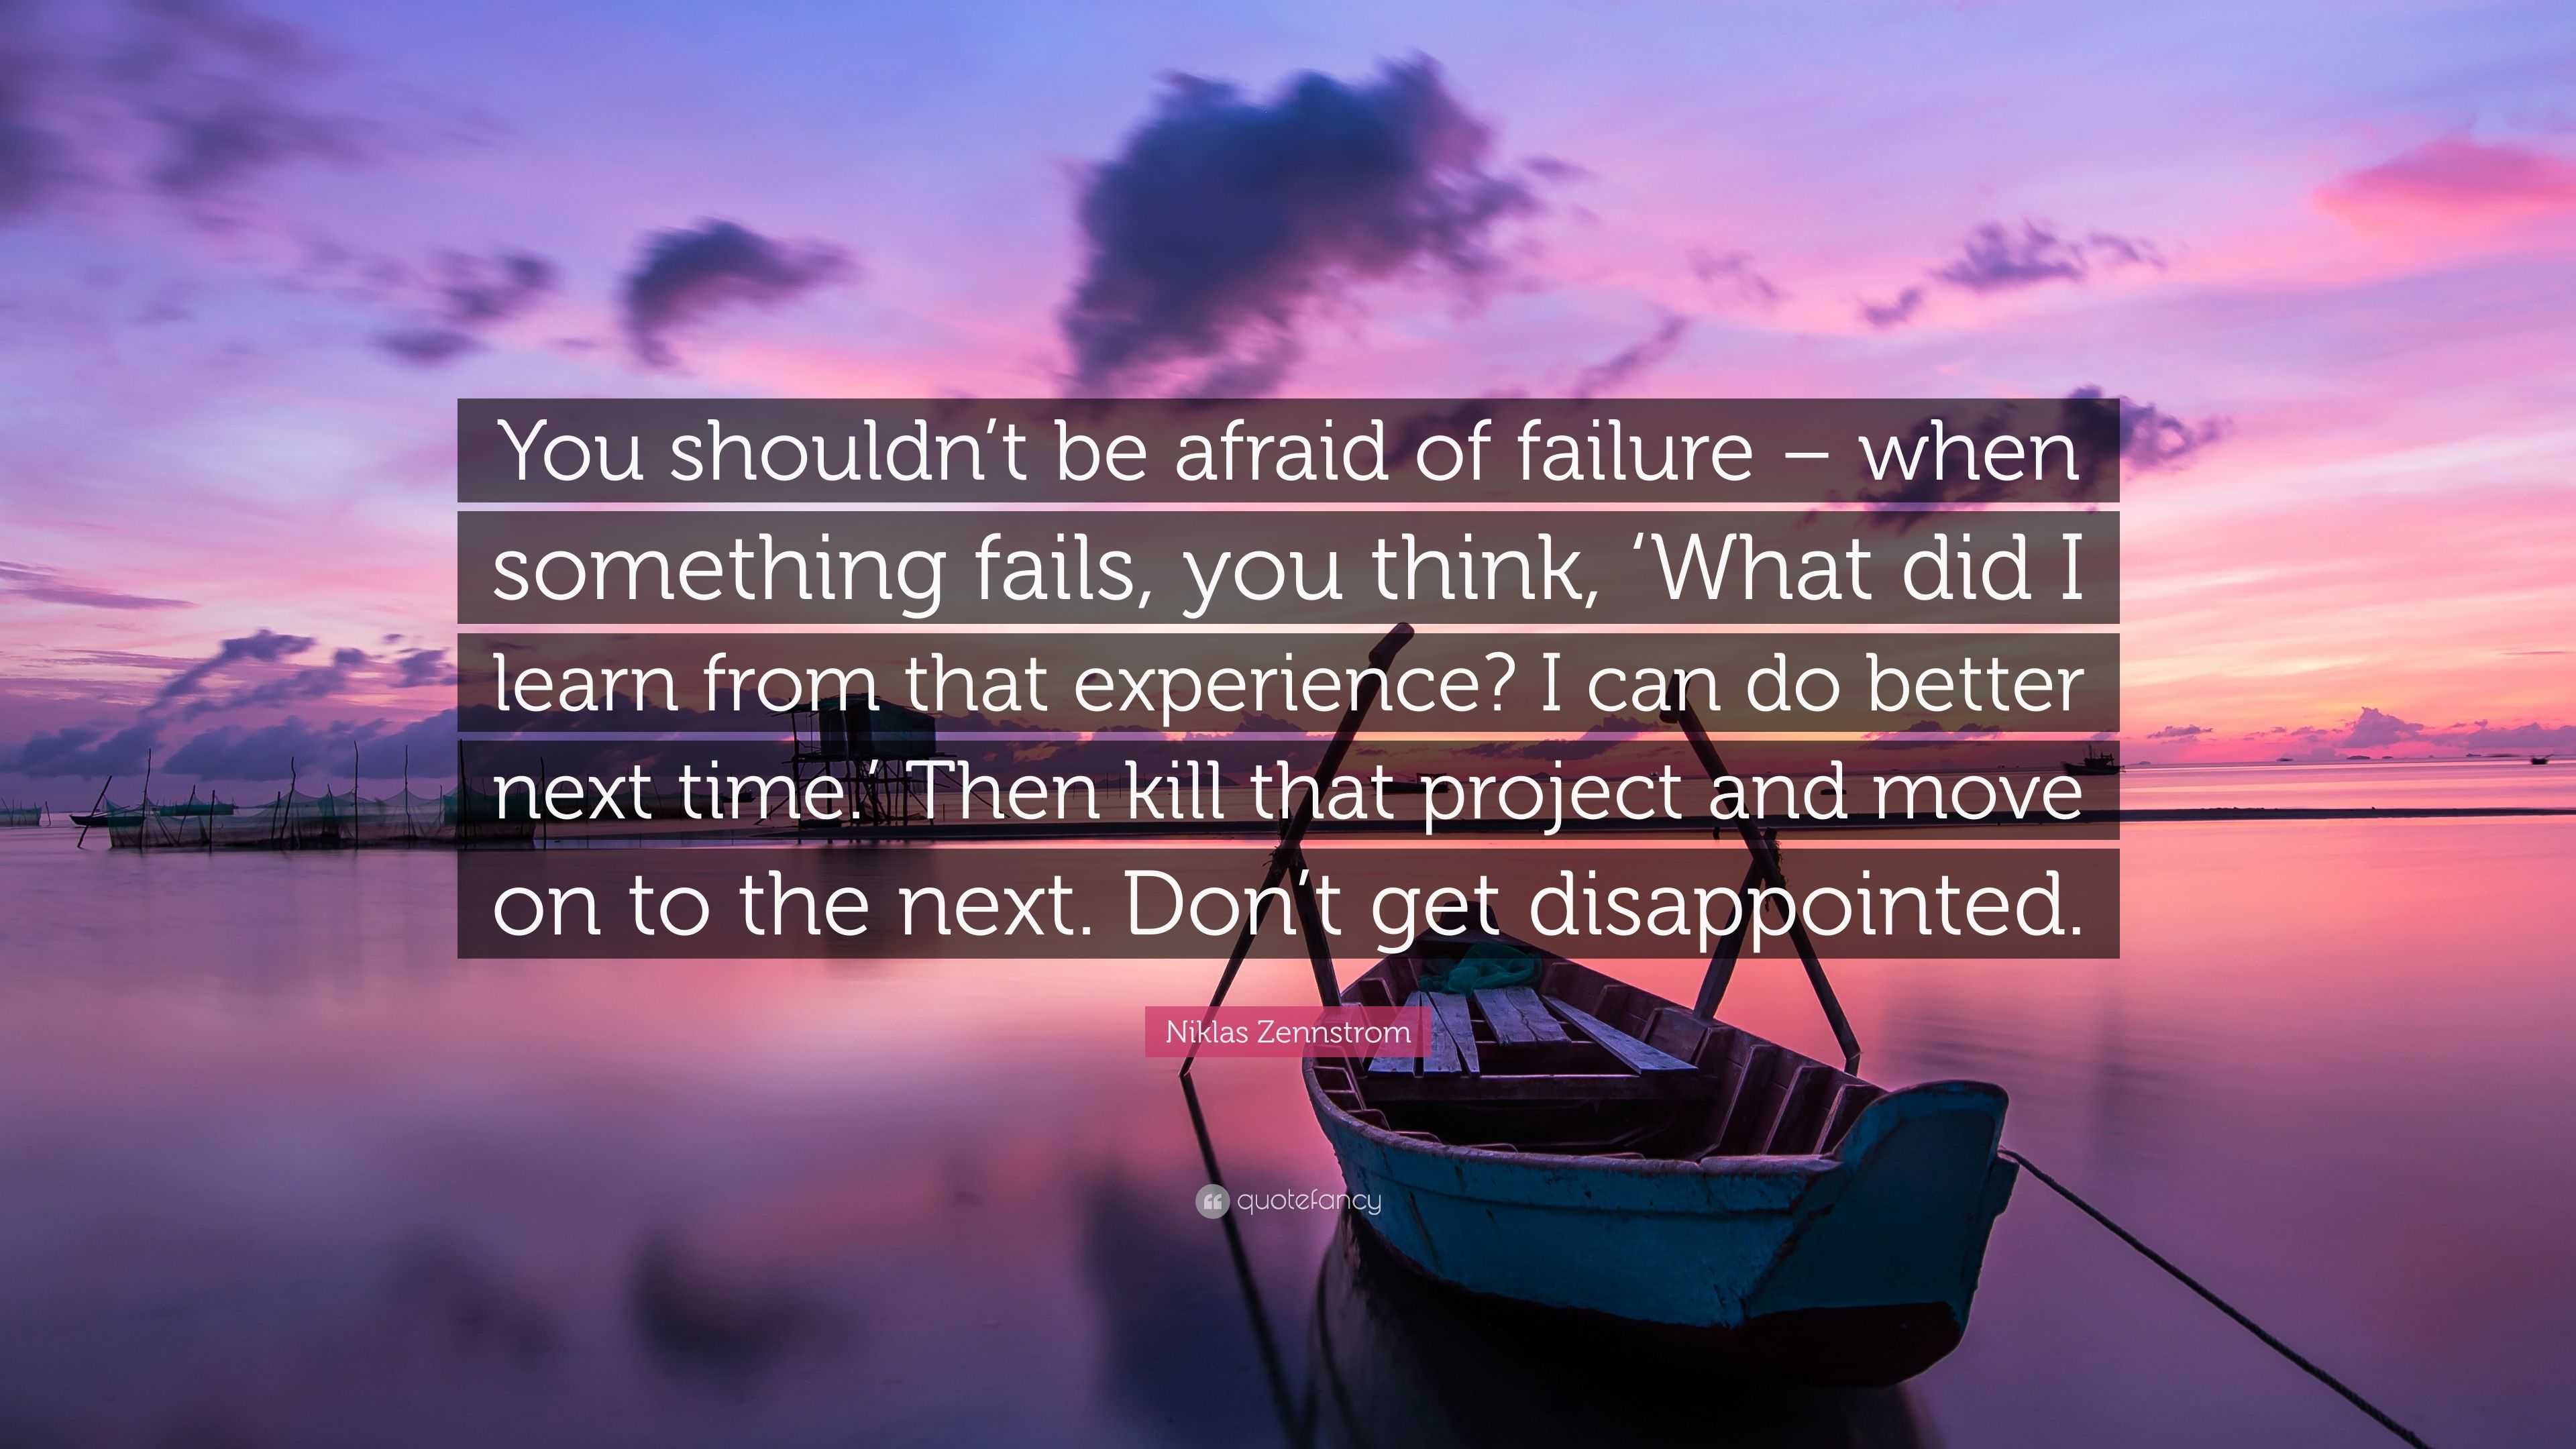 Niklas Zennstrom Quote: “You shouldn’t be afraid of failure – when ...